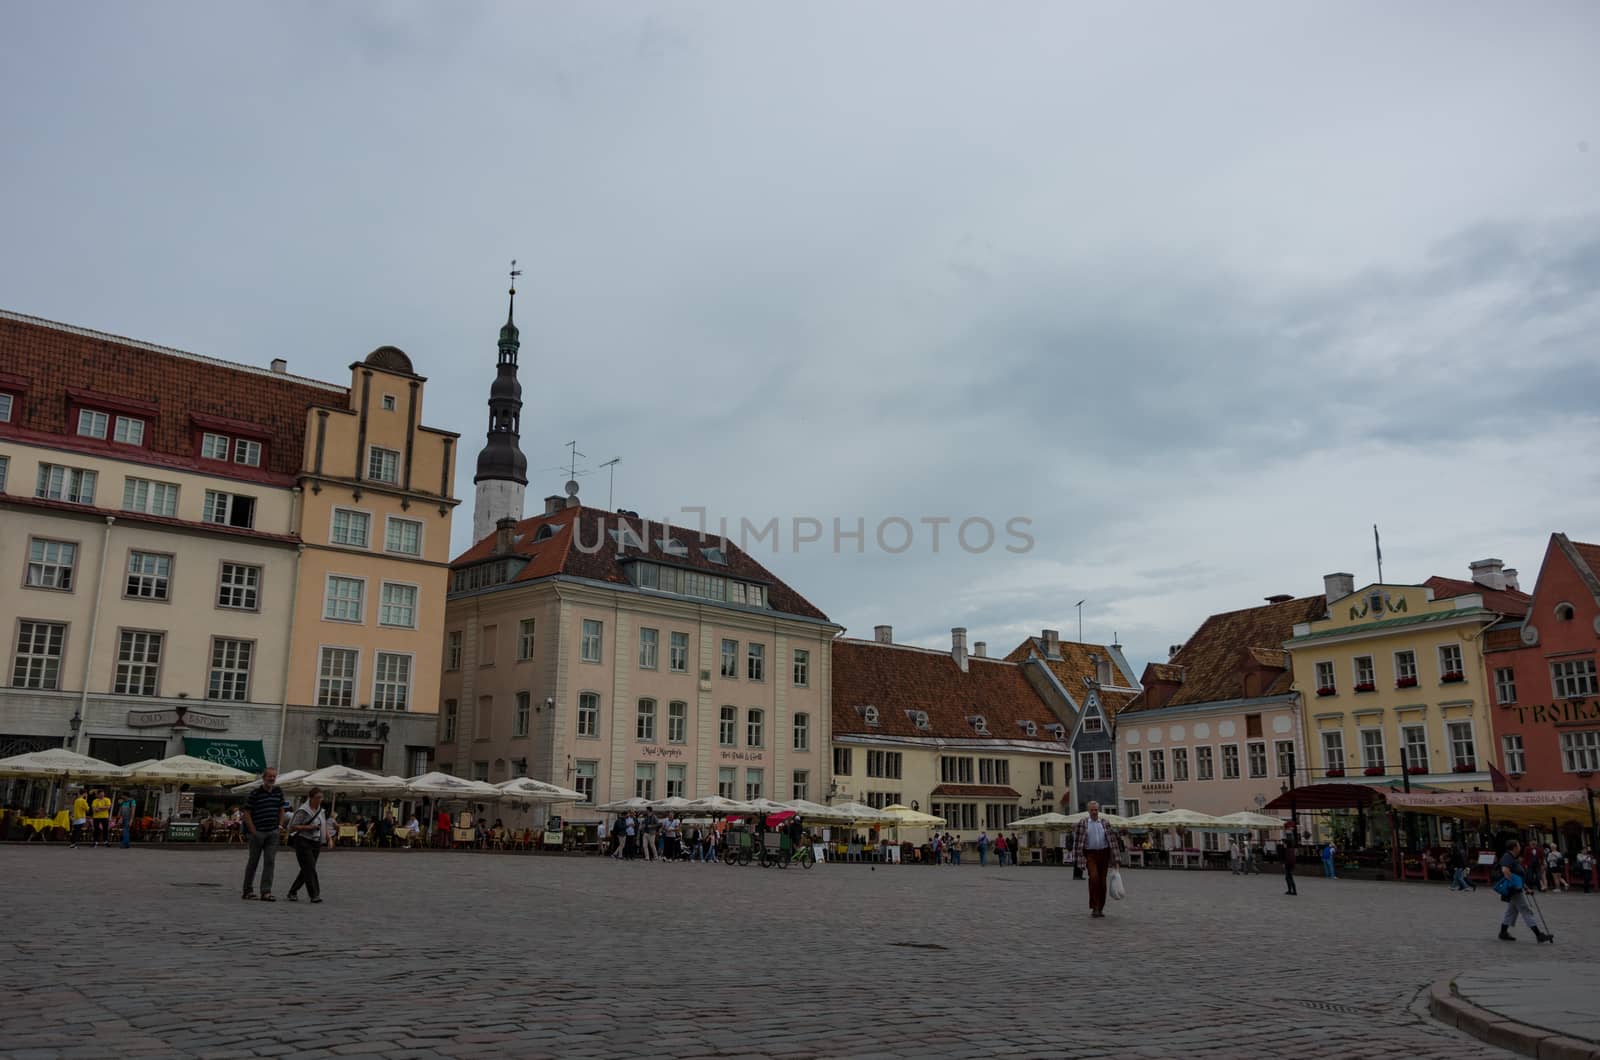 Tallinn, Estonia - July 29, 2017:  Tourists crowd the sidewalk cafes and shops in the medieval Tallinn Town Square in the walled city of Tallinn Estonia.